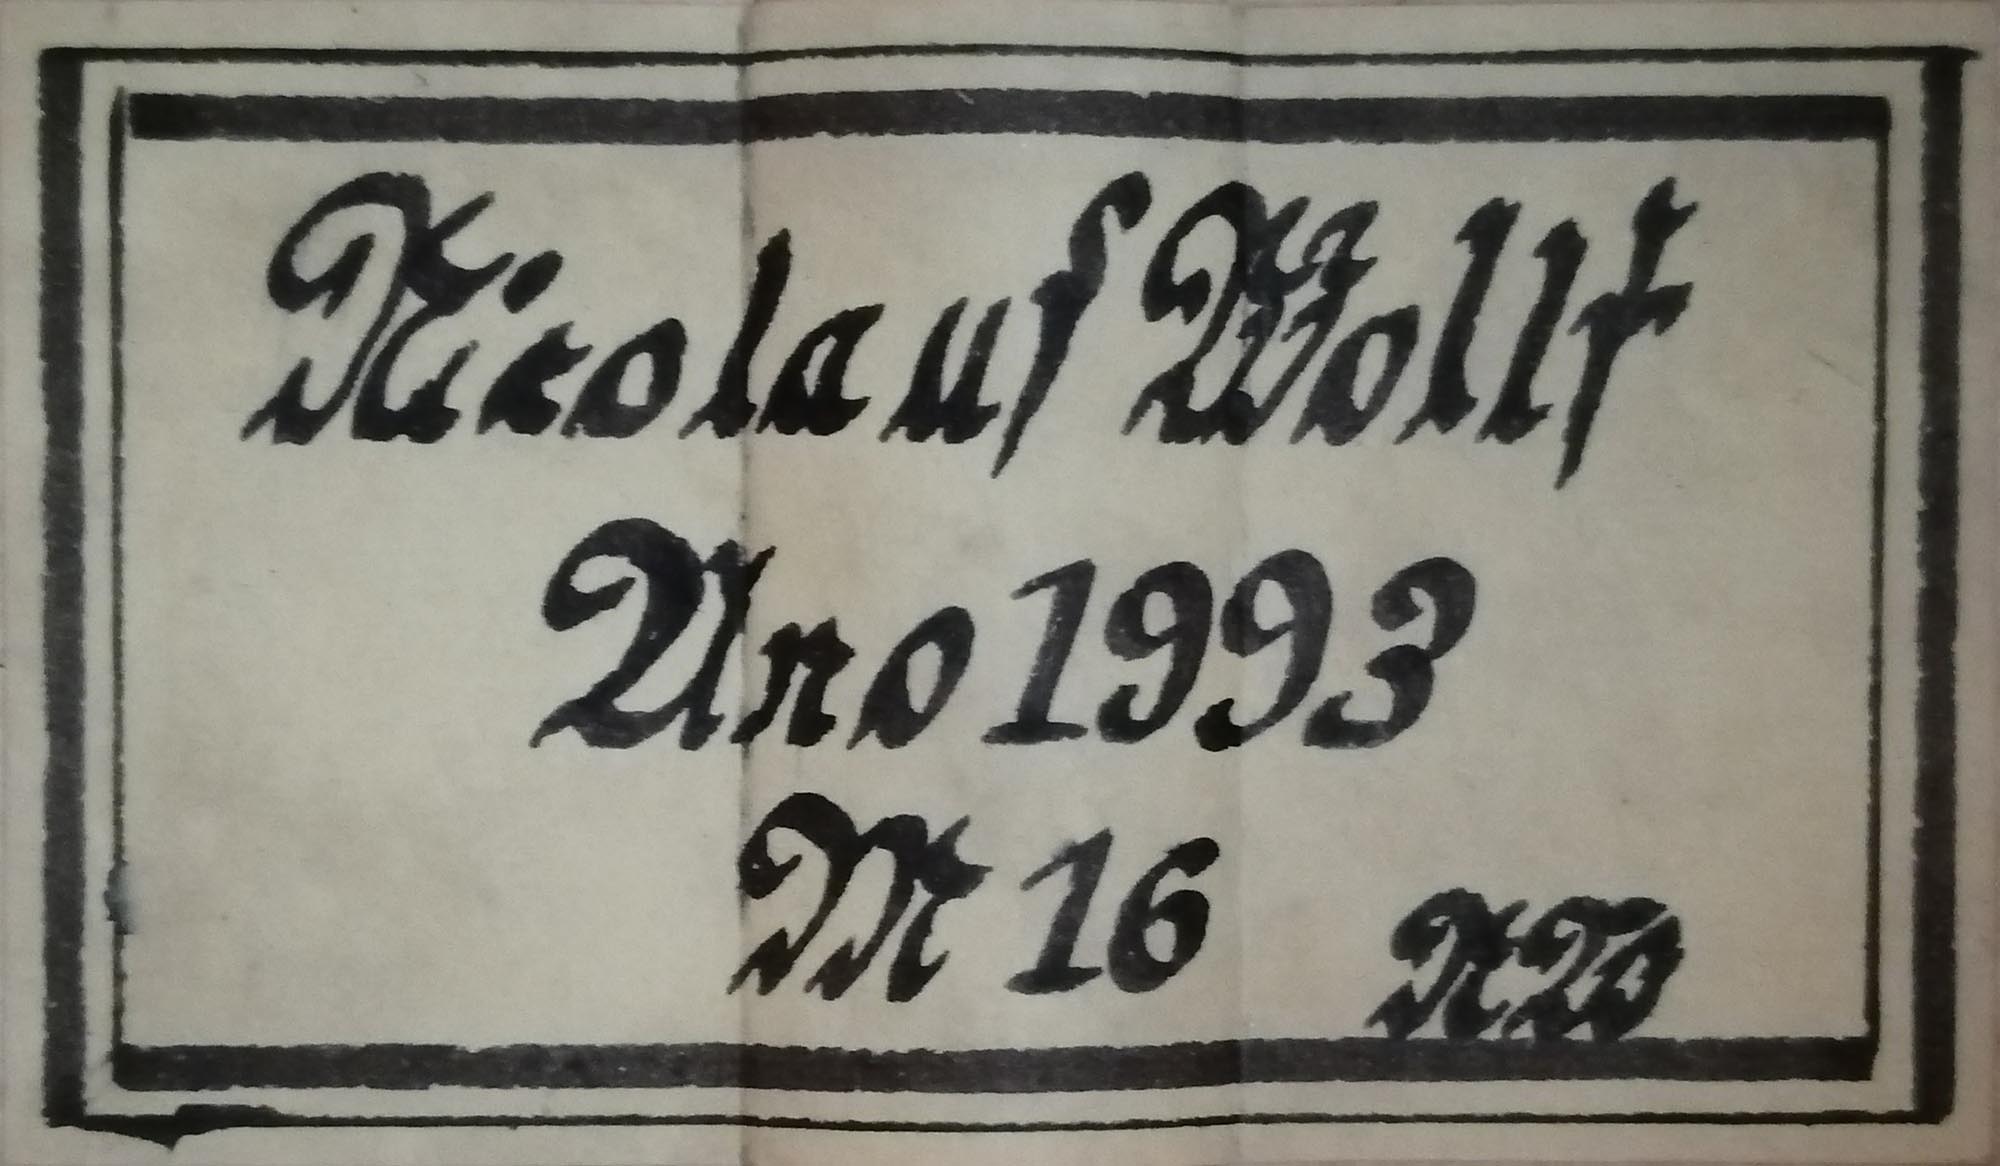 a nicolauswollf 1993 18012019 label